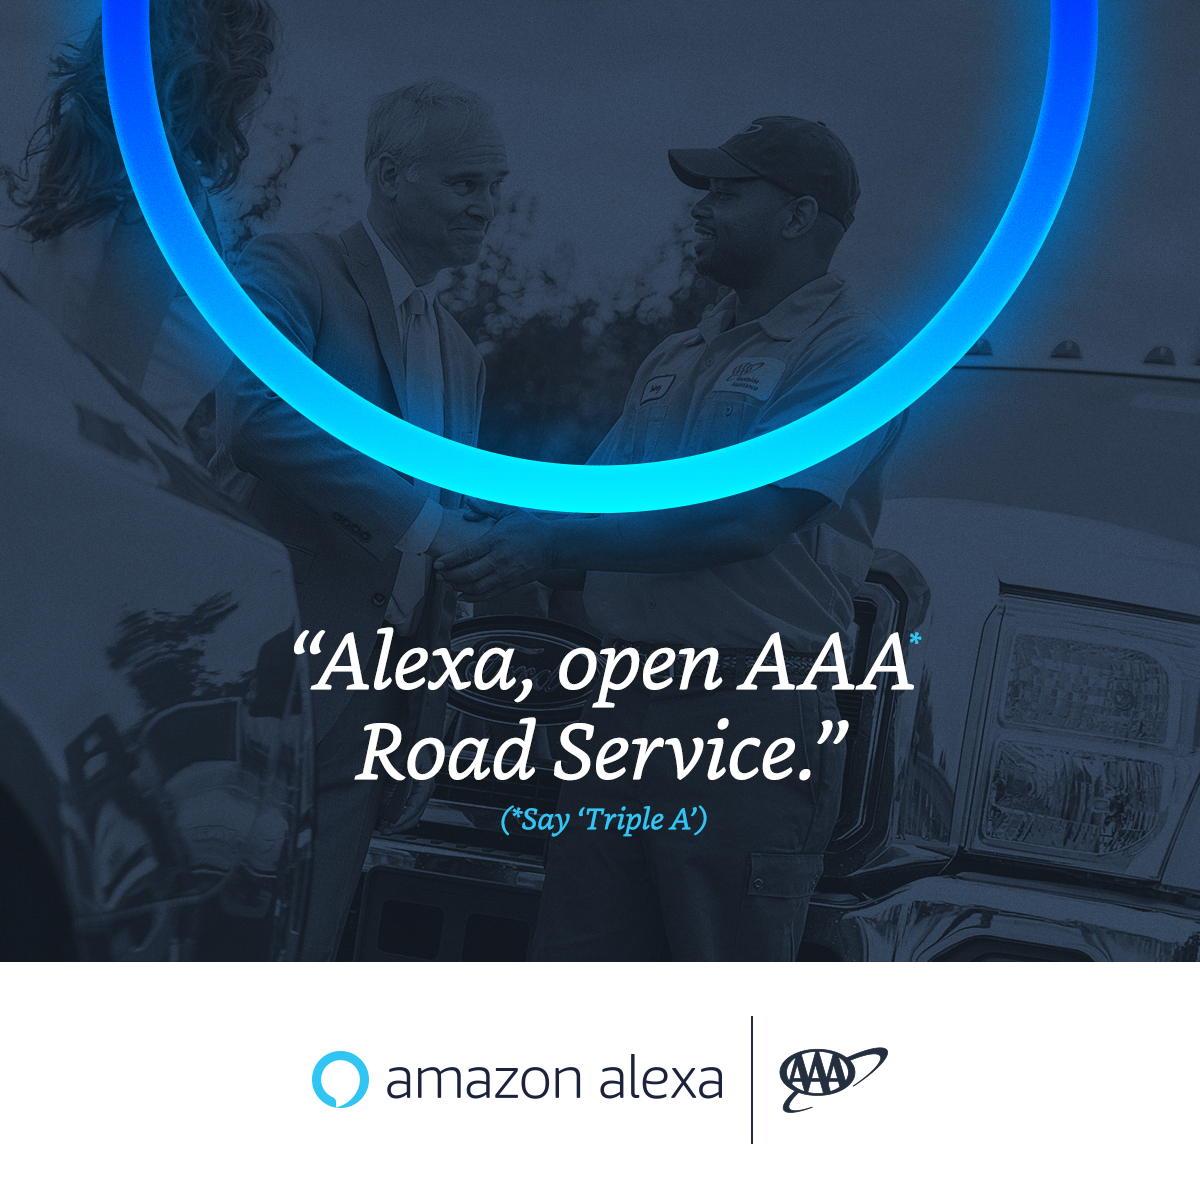 Graphic showing someone using AAA road service with Google Alexa 